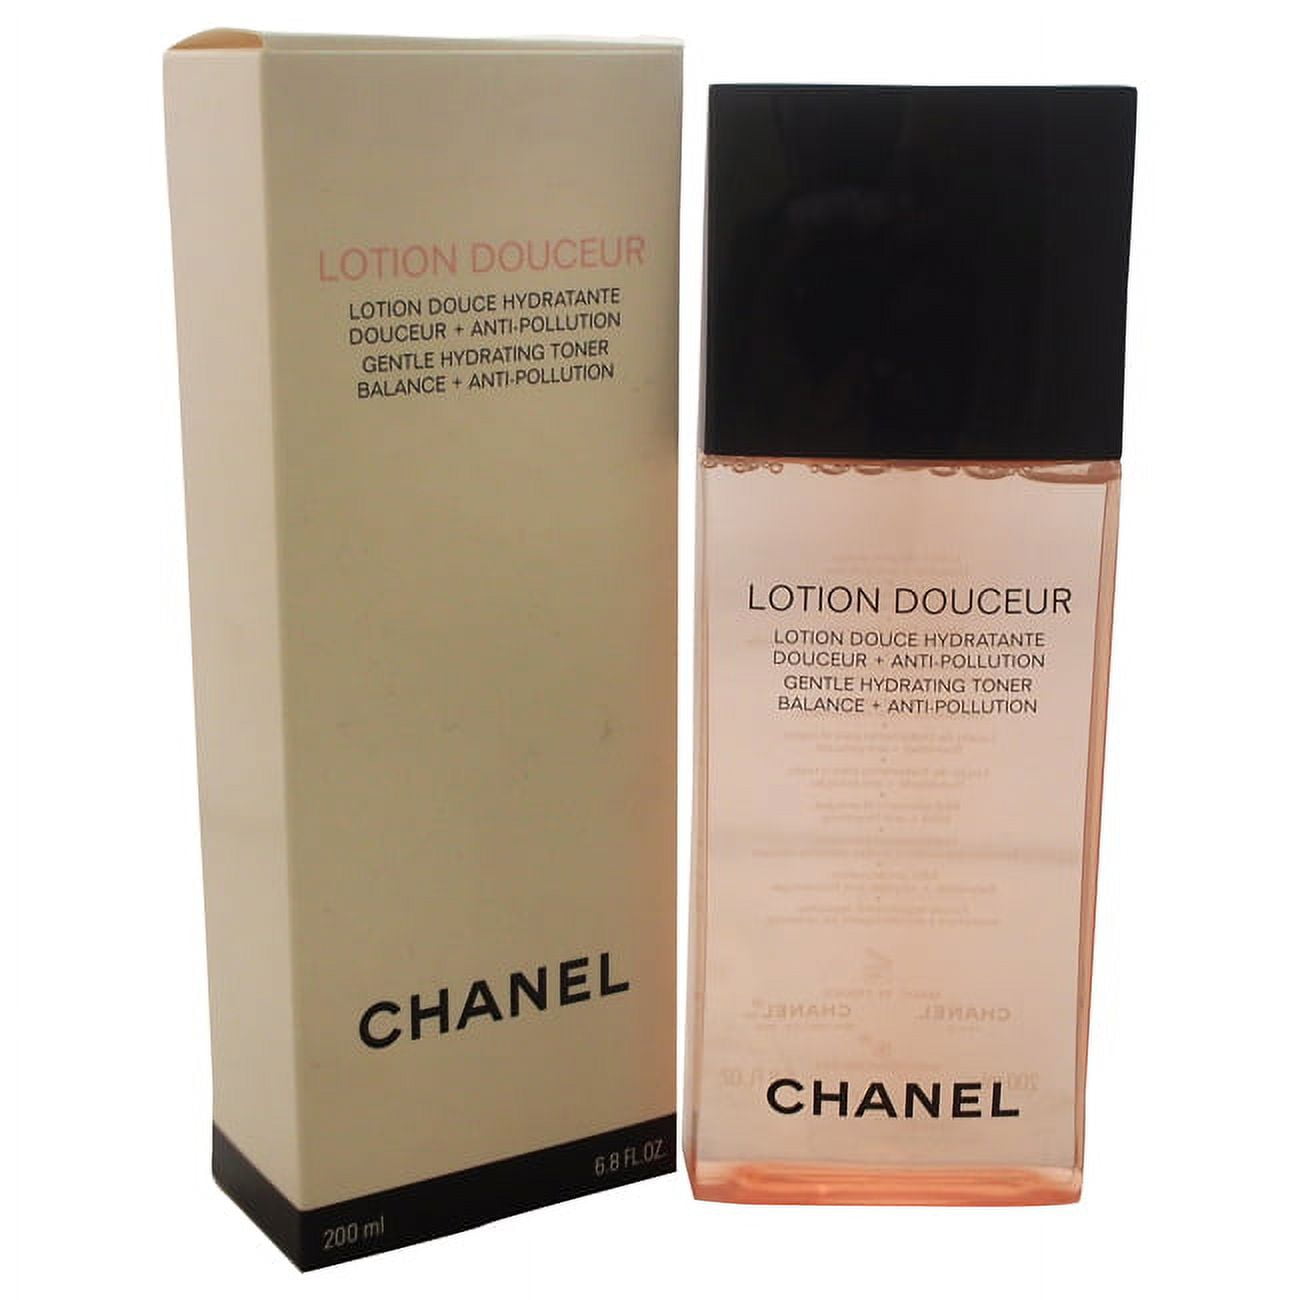 Lotion Douceur Gentle Hydrating Toner Balance + Anti-Pollution by